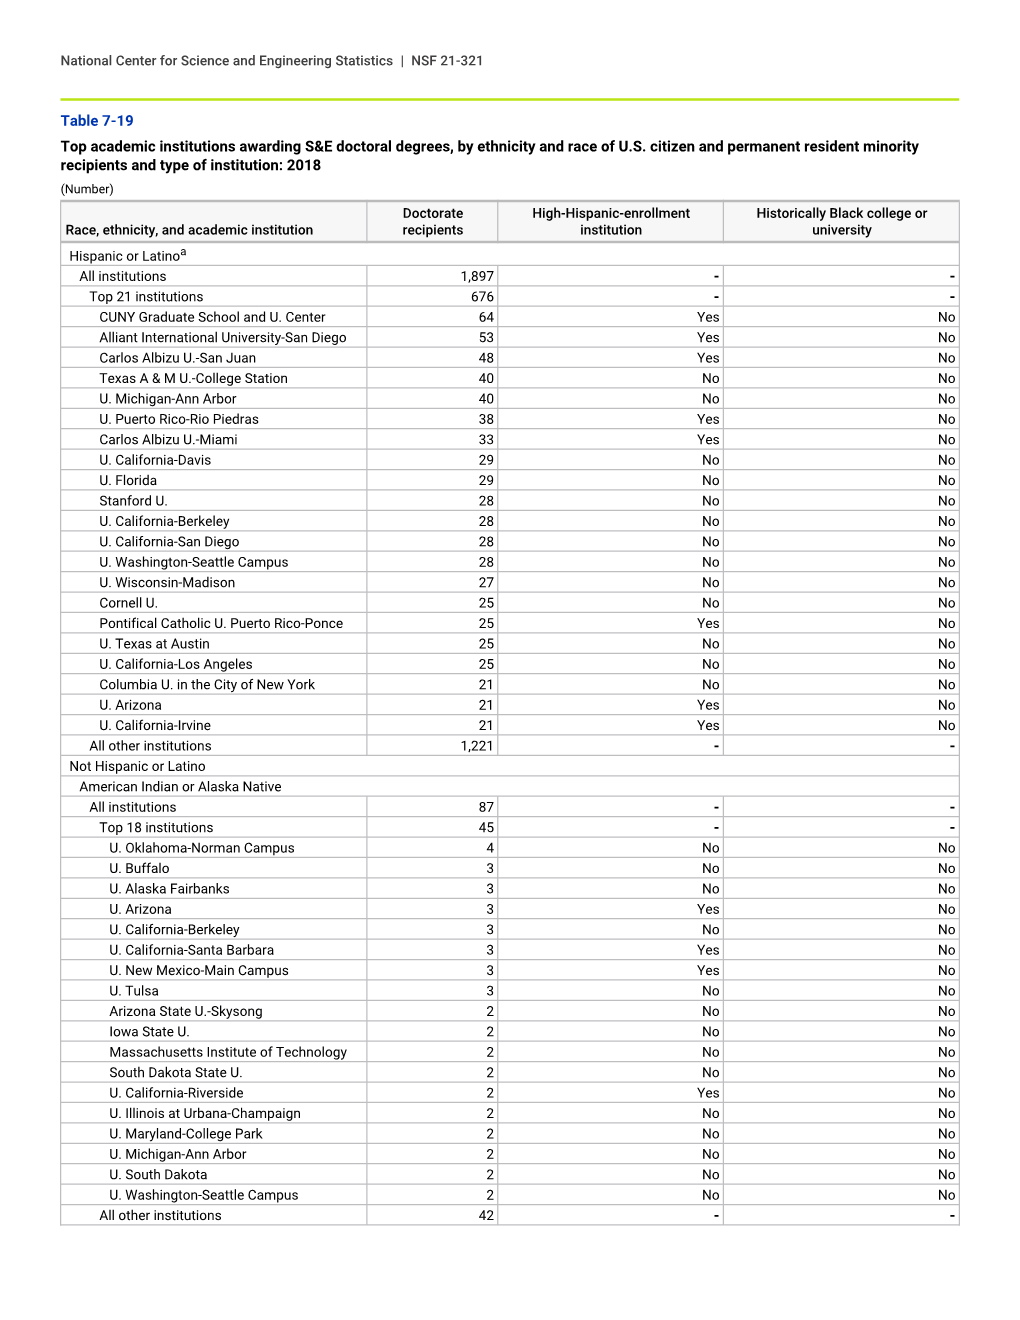 Table 7-19 Top Academic Institutions Awarding S&E Doctoral Degrees, By